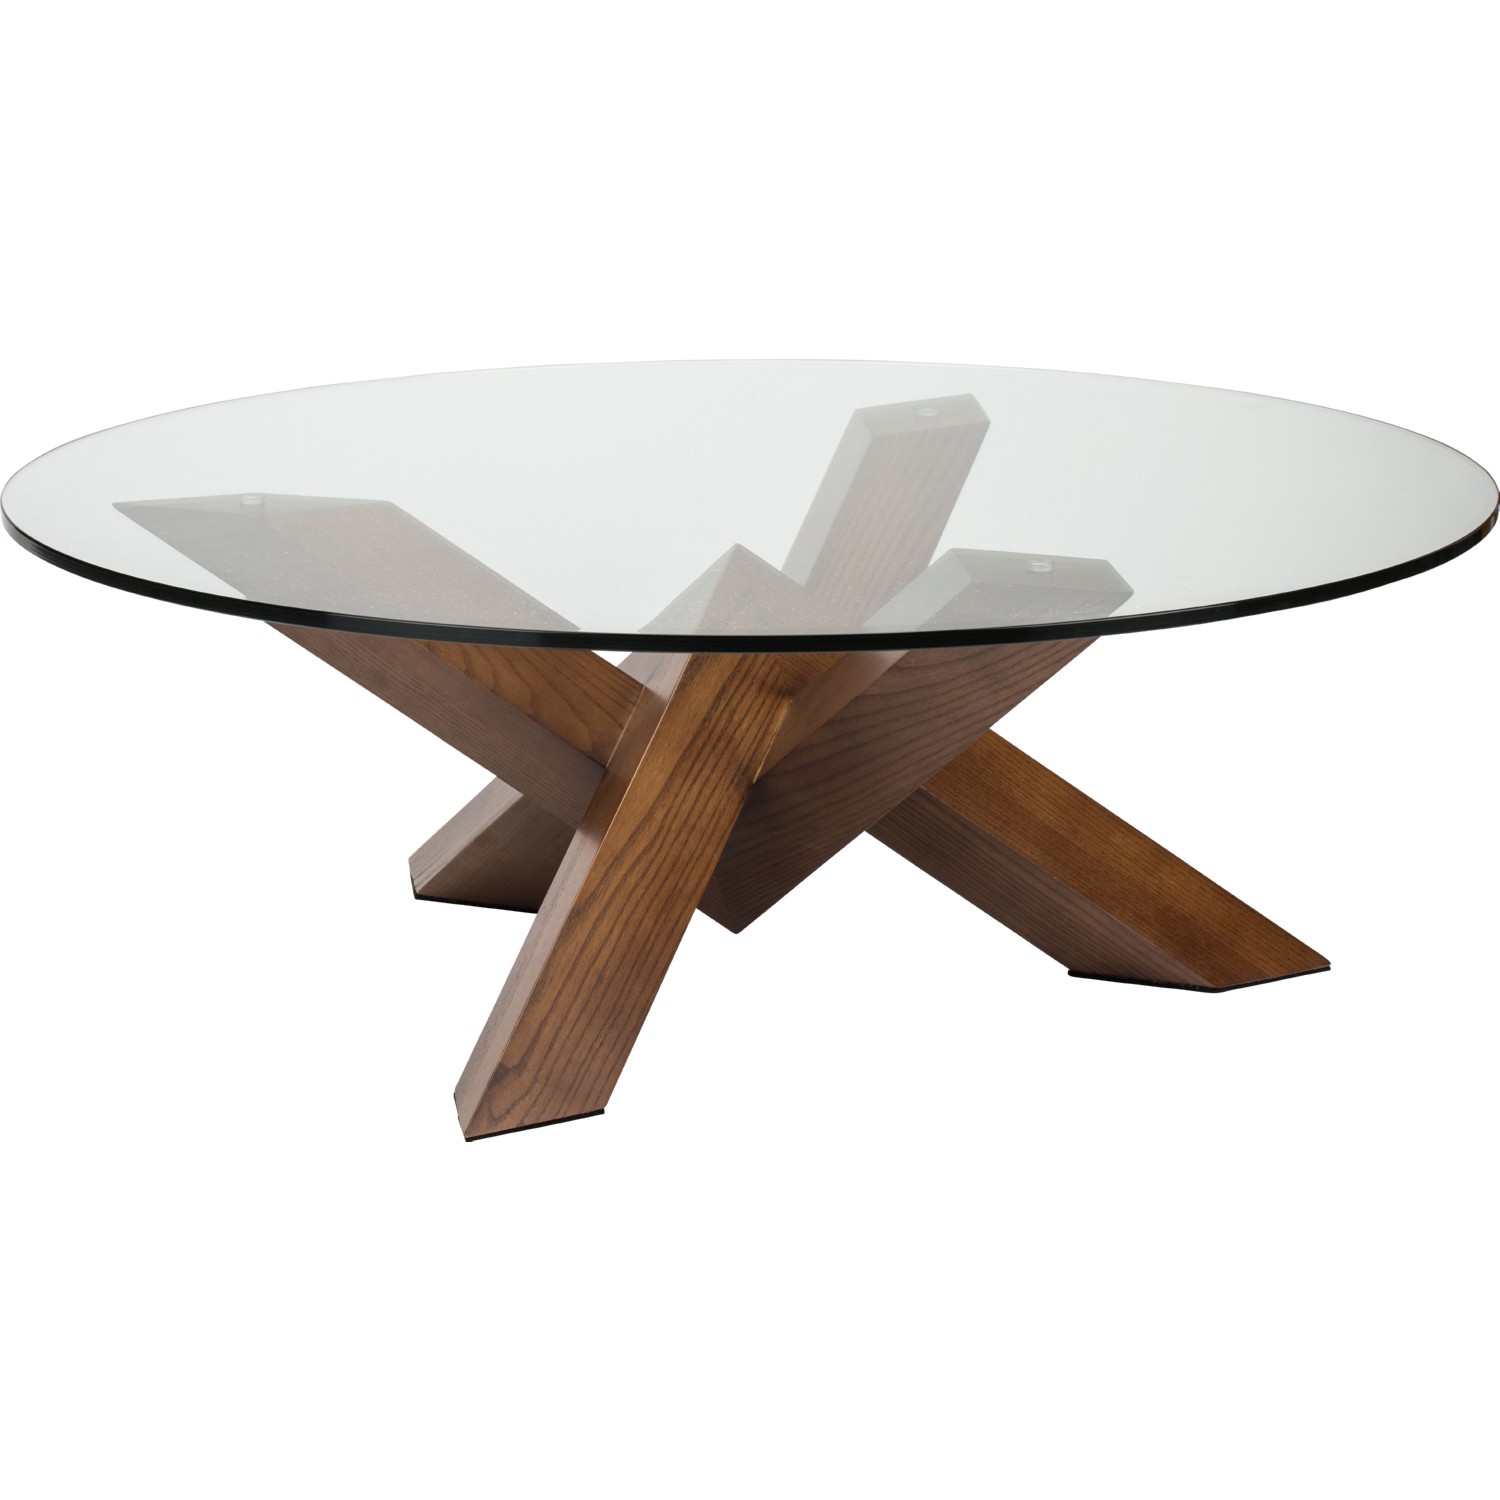 Cosmic Table GM Textured By Raw Edges - Art of Living - Home